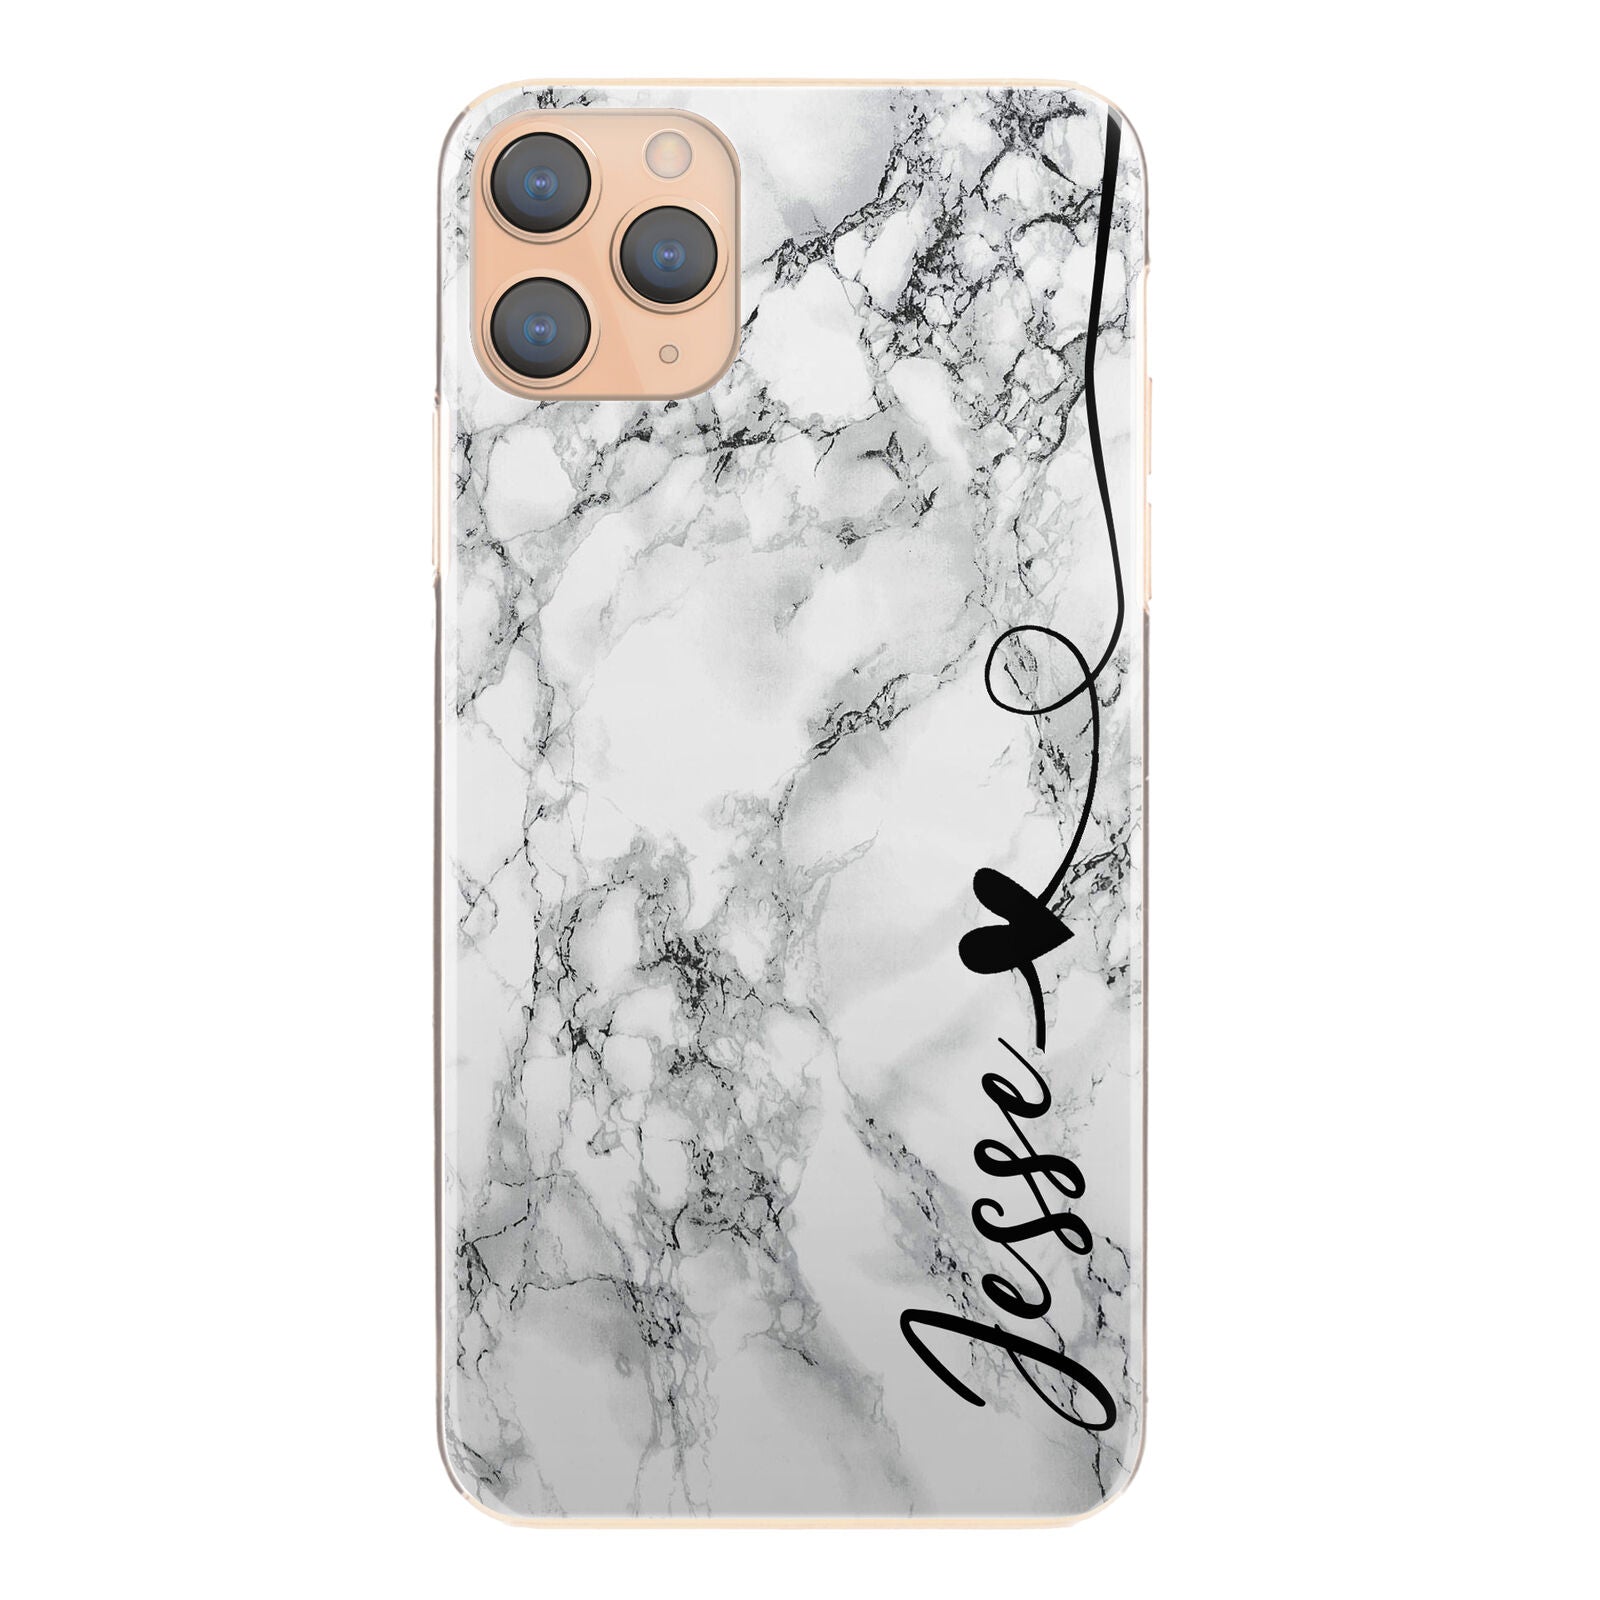 Personalised Phone Case For iPhone X/XS , Initial Grey/Black Marble Hard Cover